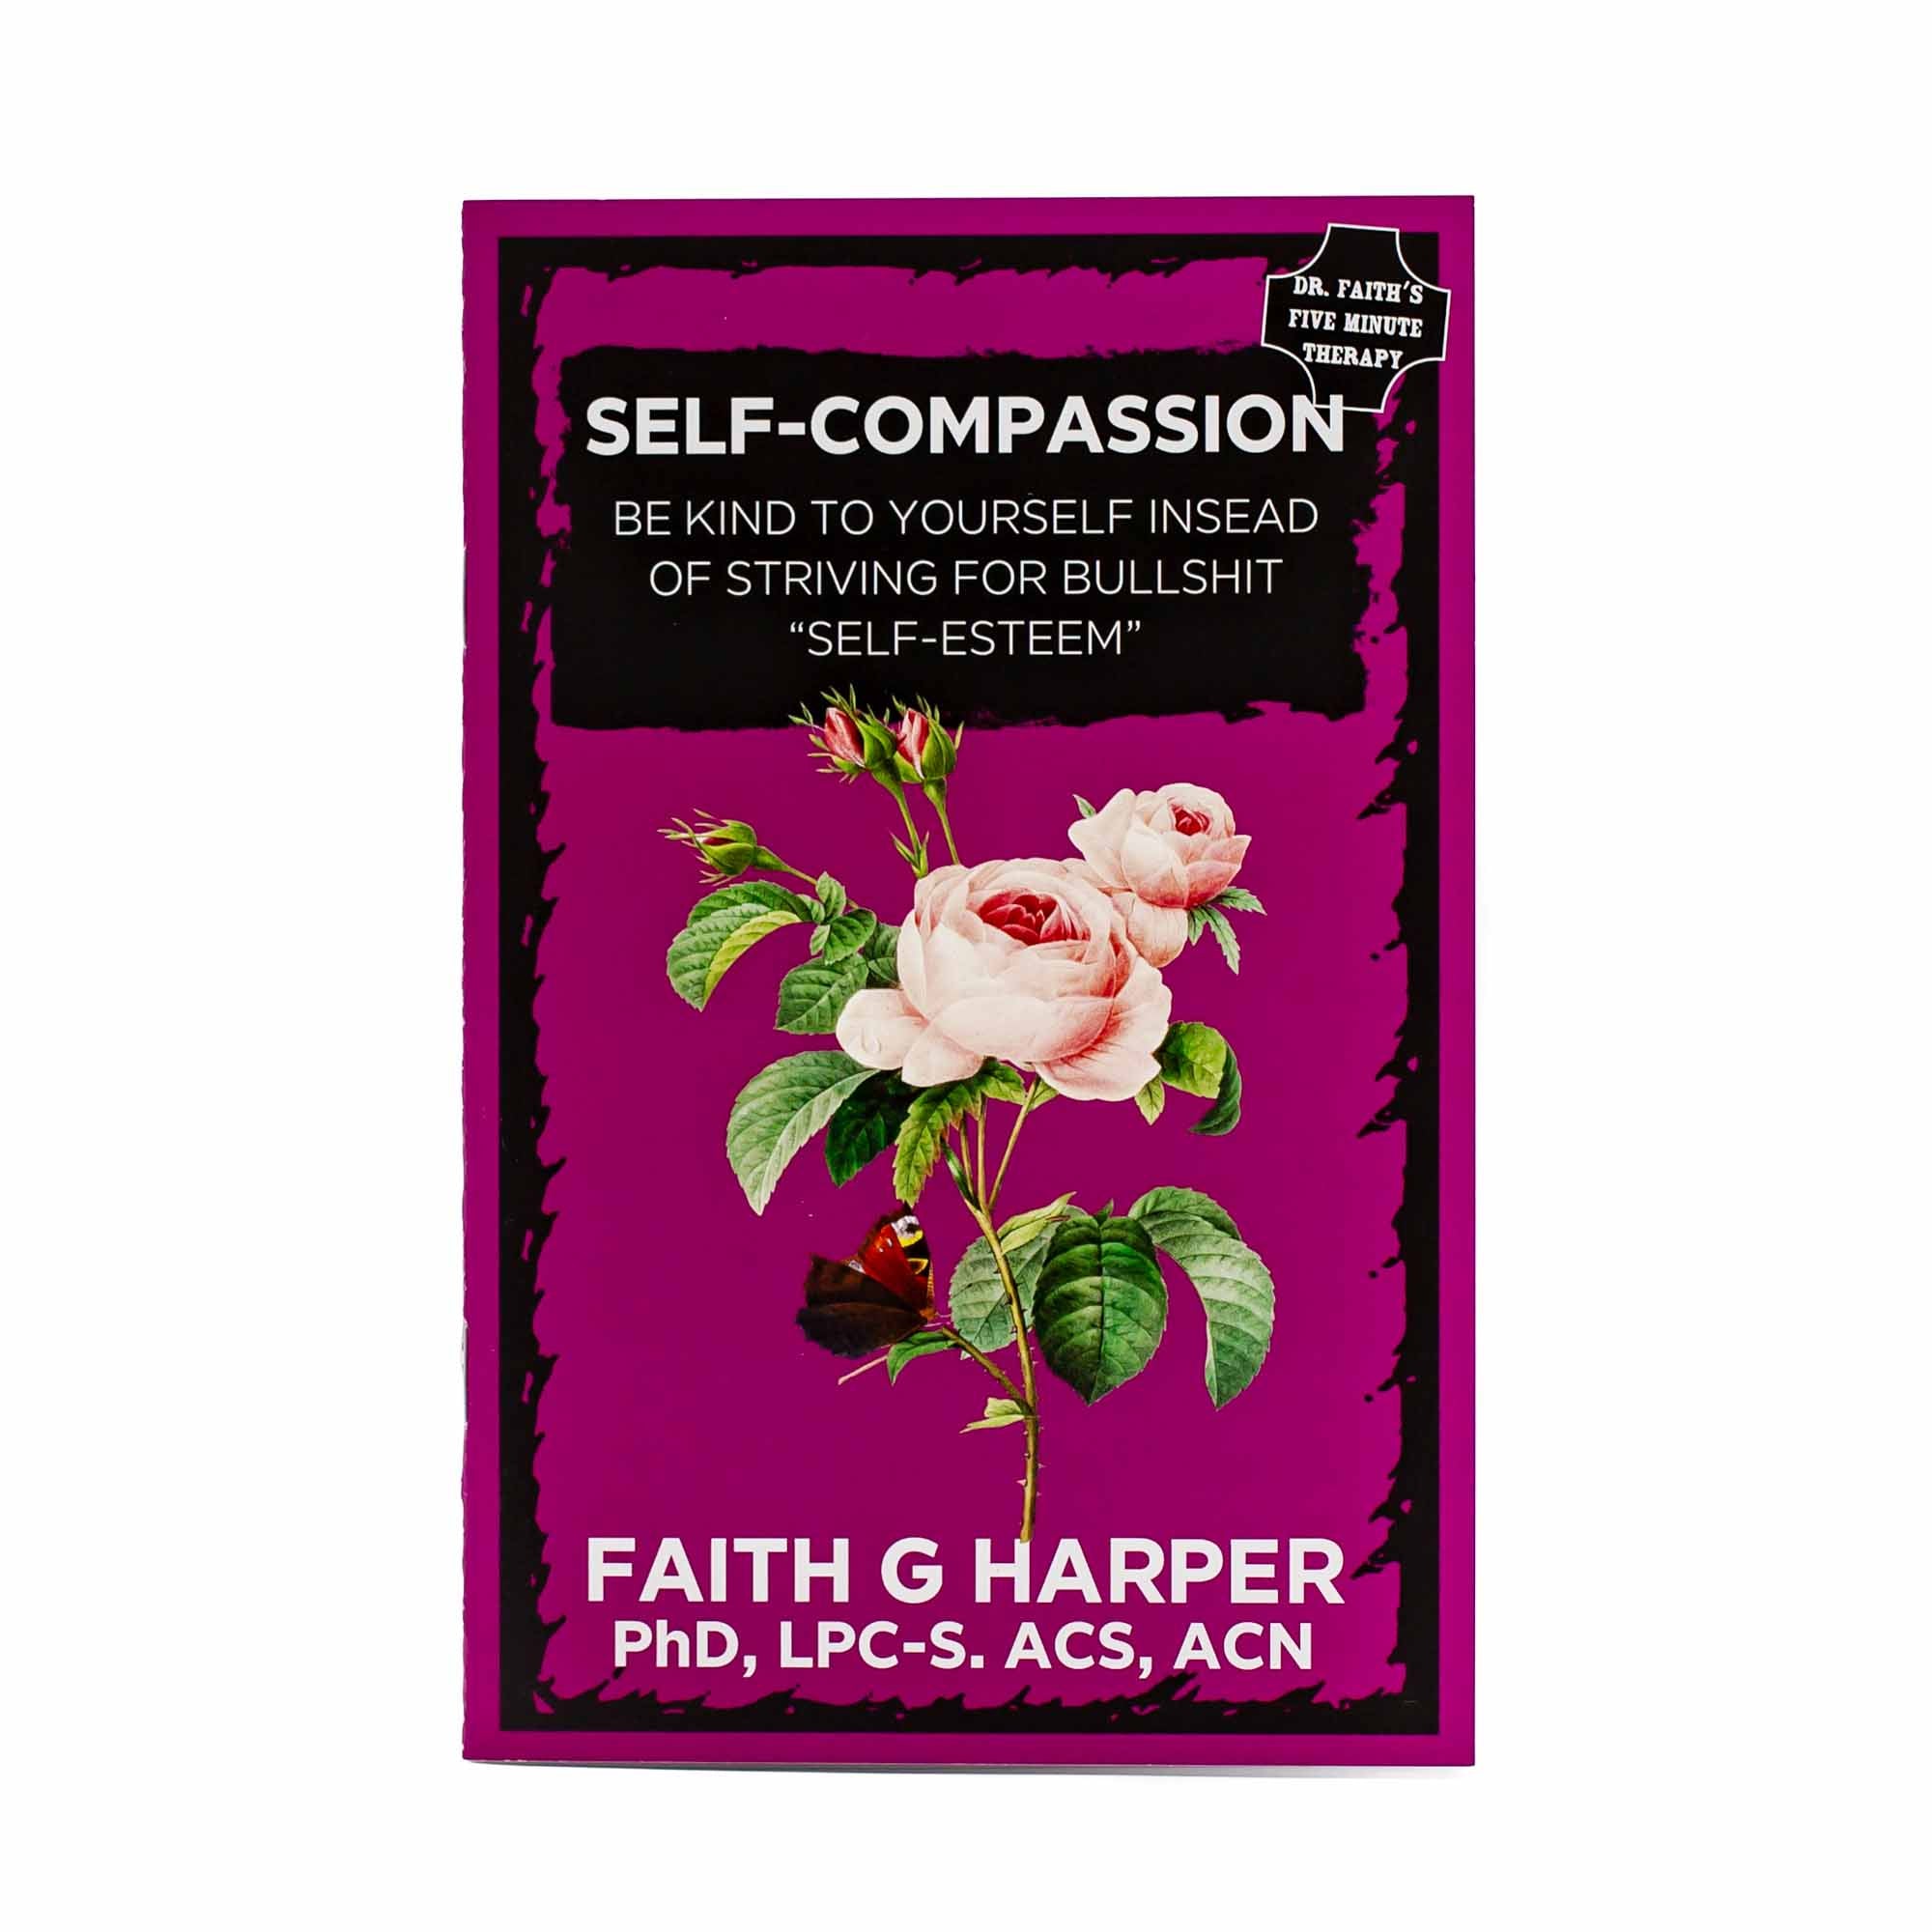 Self Compassion: Be Kind to Yourself Instead of Striving for Bullshit "Self-Esteem" by Faith G. Harper - Mortise And Tenon